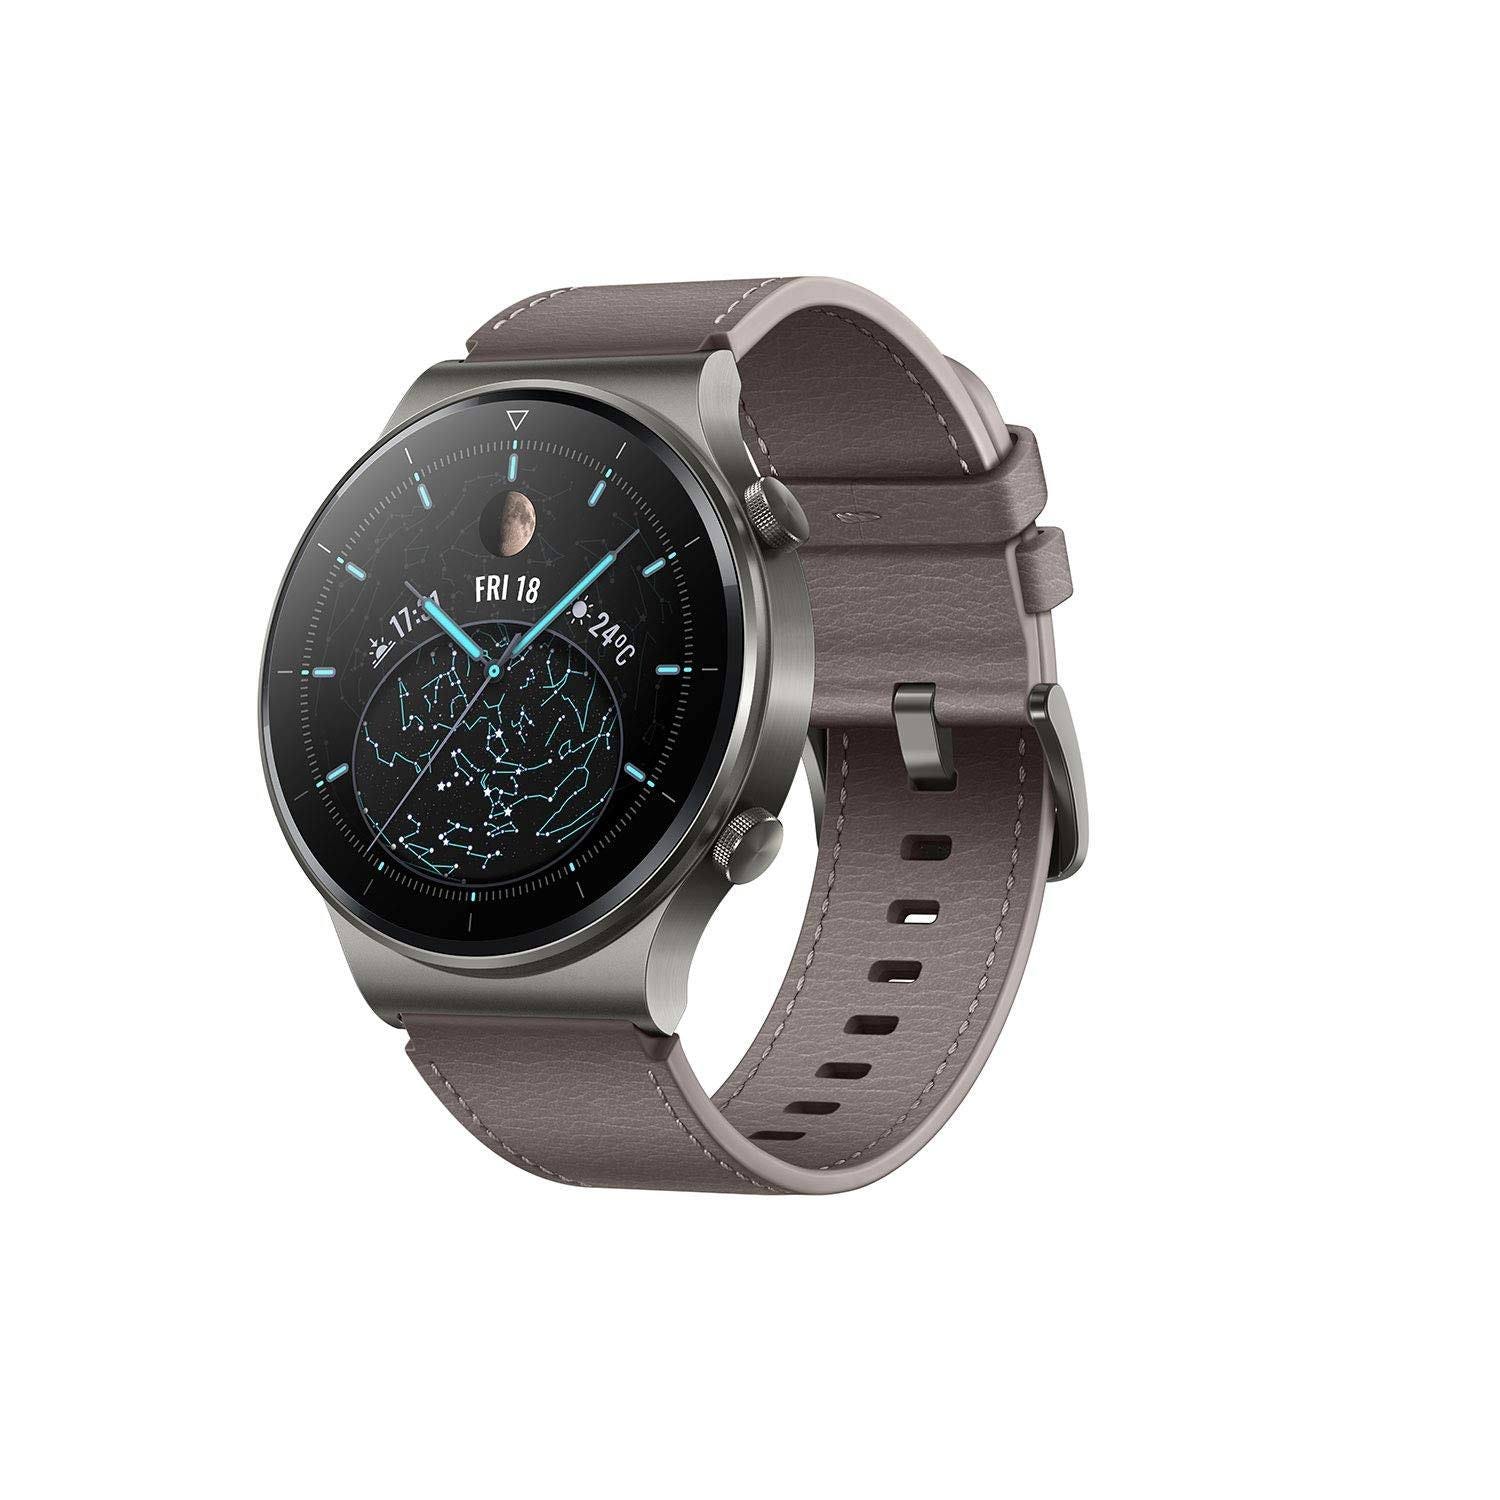 High-End Smartwatch with Advanced Outdoor Tracking and Long Battery Life | Image